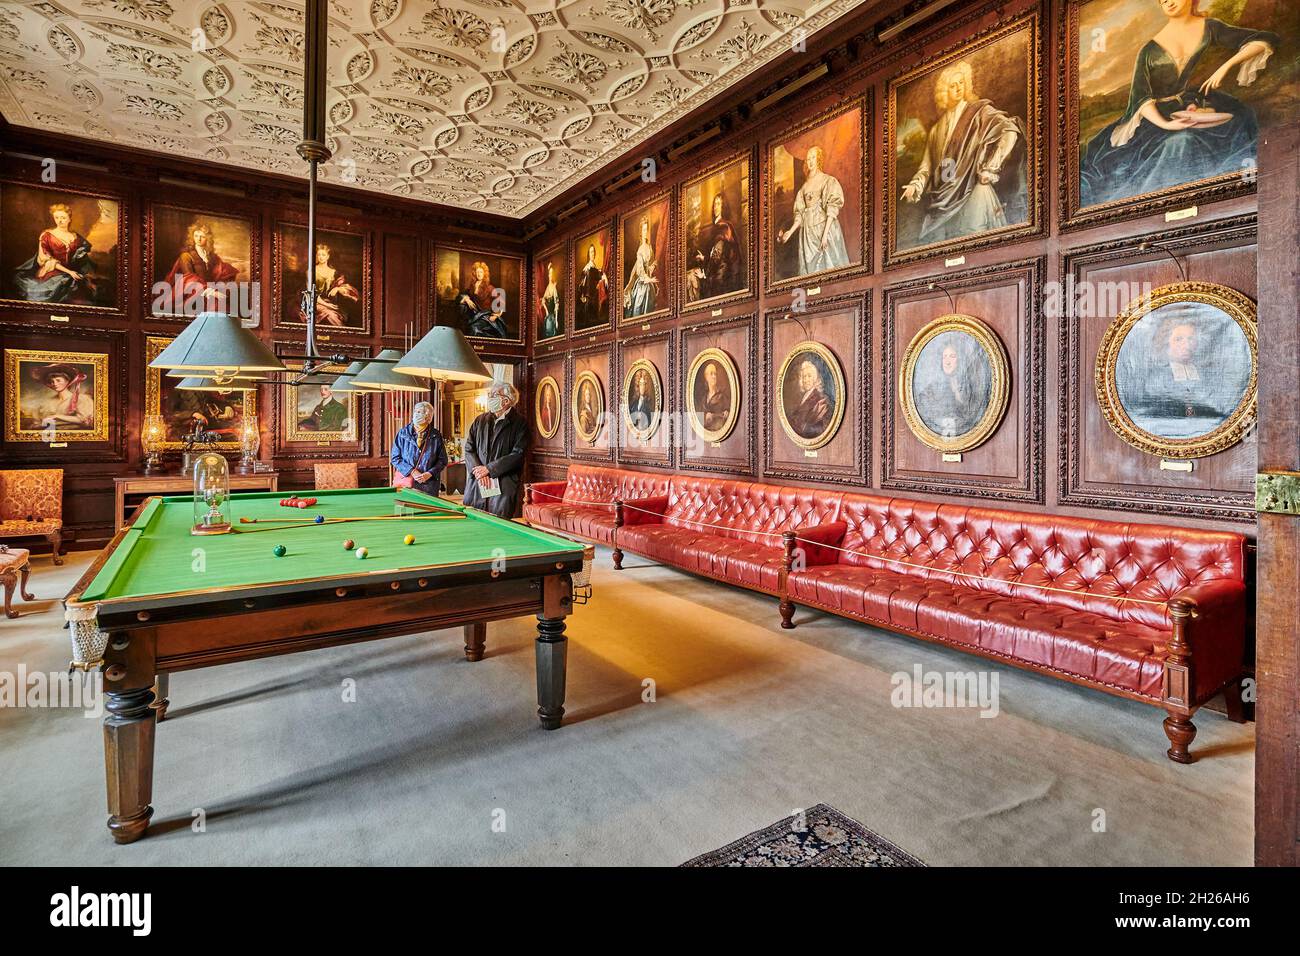 Visitors in the billiard room at Burghley House, an elizabethan mansion built by William Cecil, Lord Burghley, at Stamford in 16 century England. Stock Photo